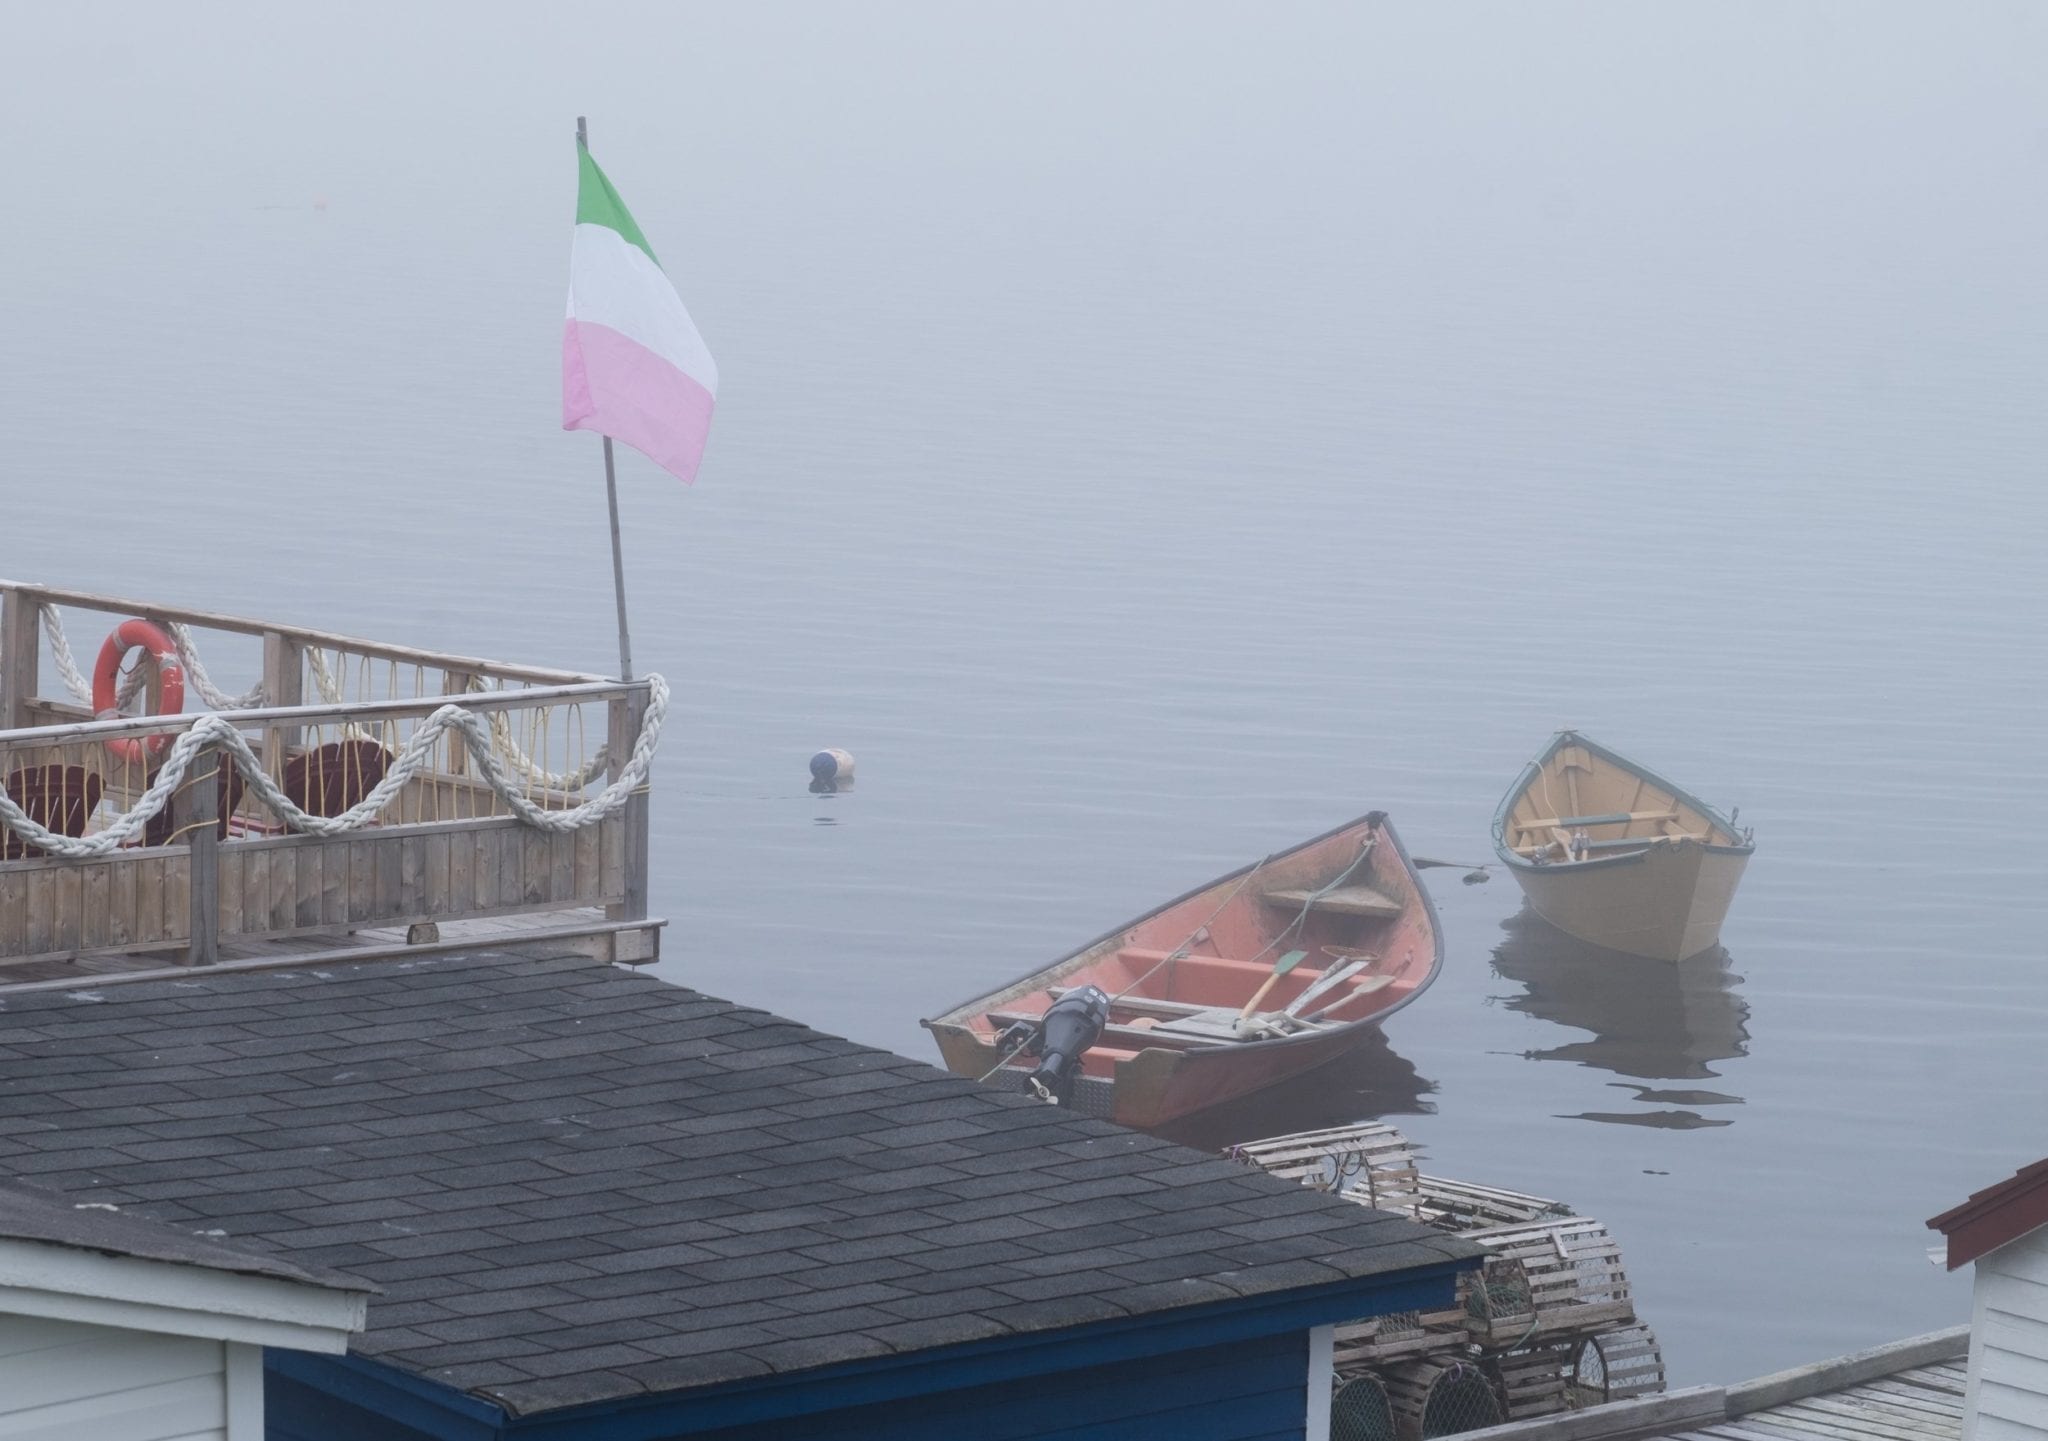 Rowboats in a foggy gray harbor. A flagpole with the green, white and pink Newfoundland independence flag on top.